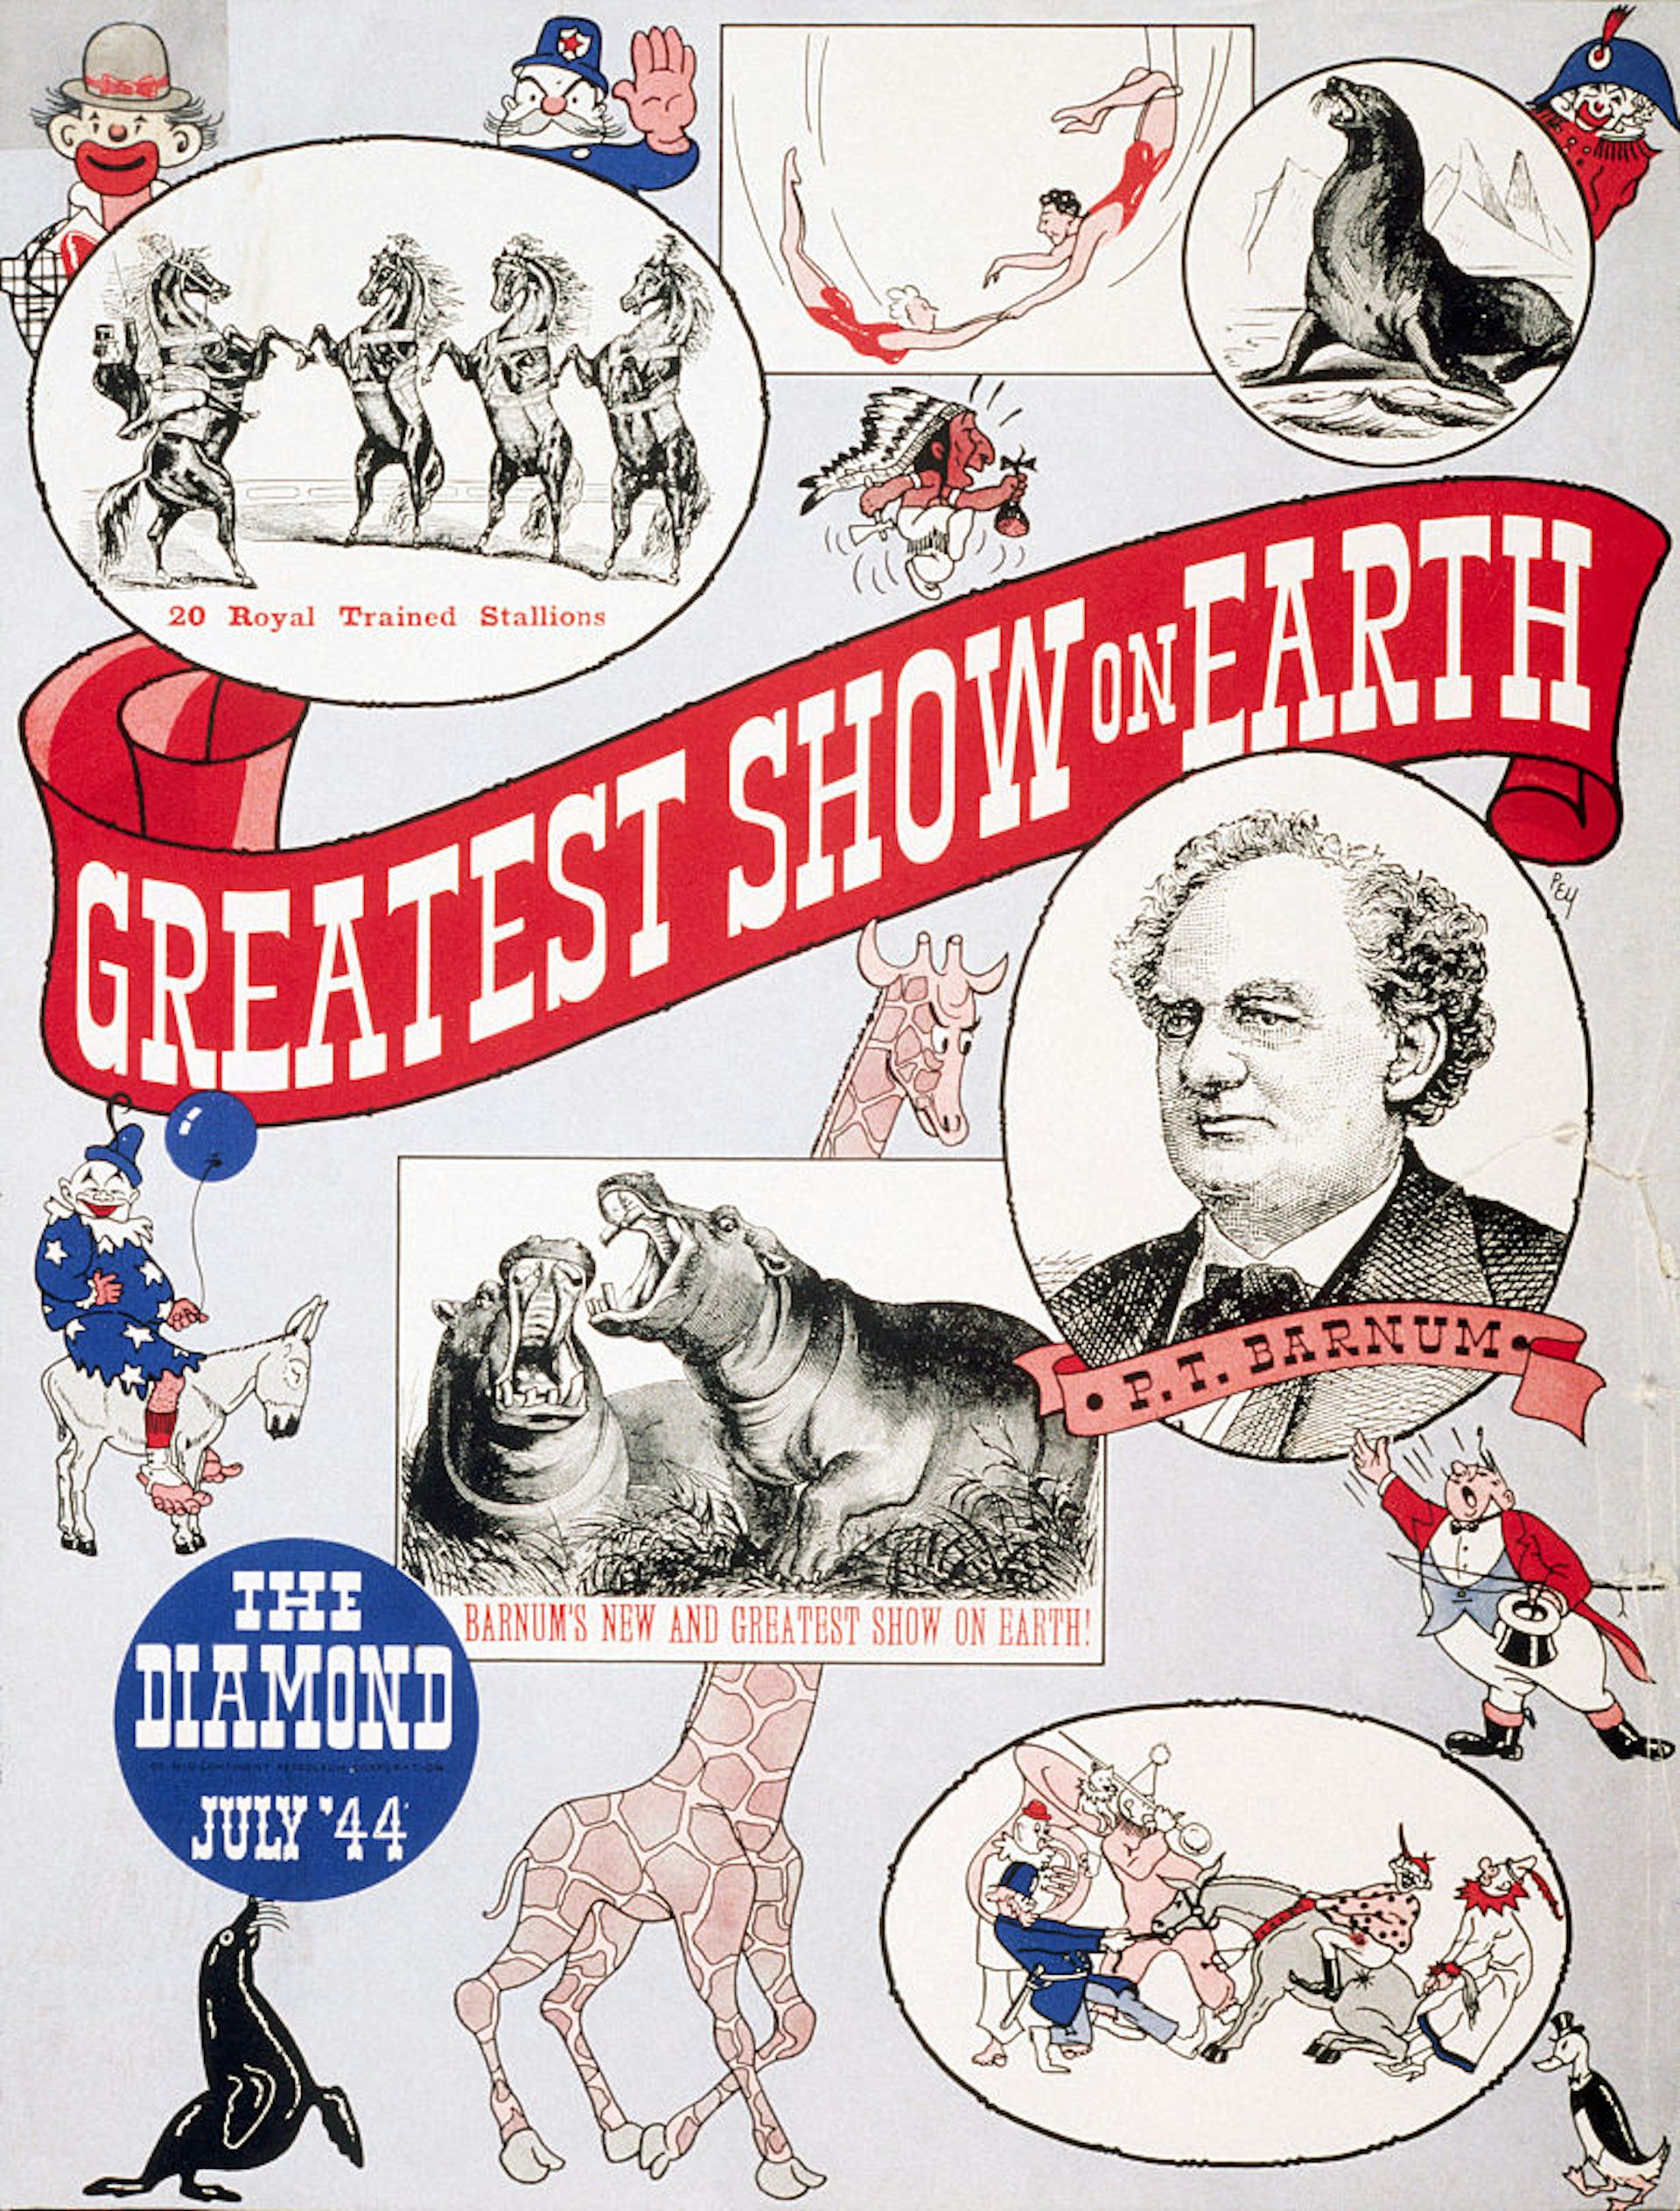 Circus advertisement featuring drawings of clowns and animals.